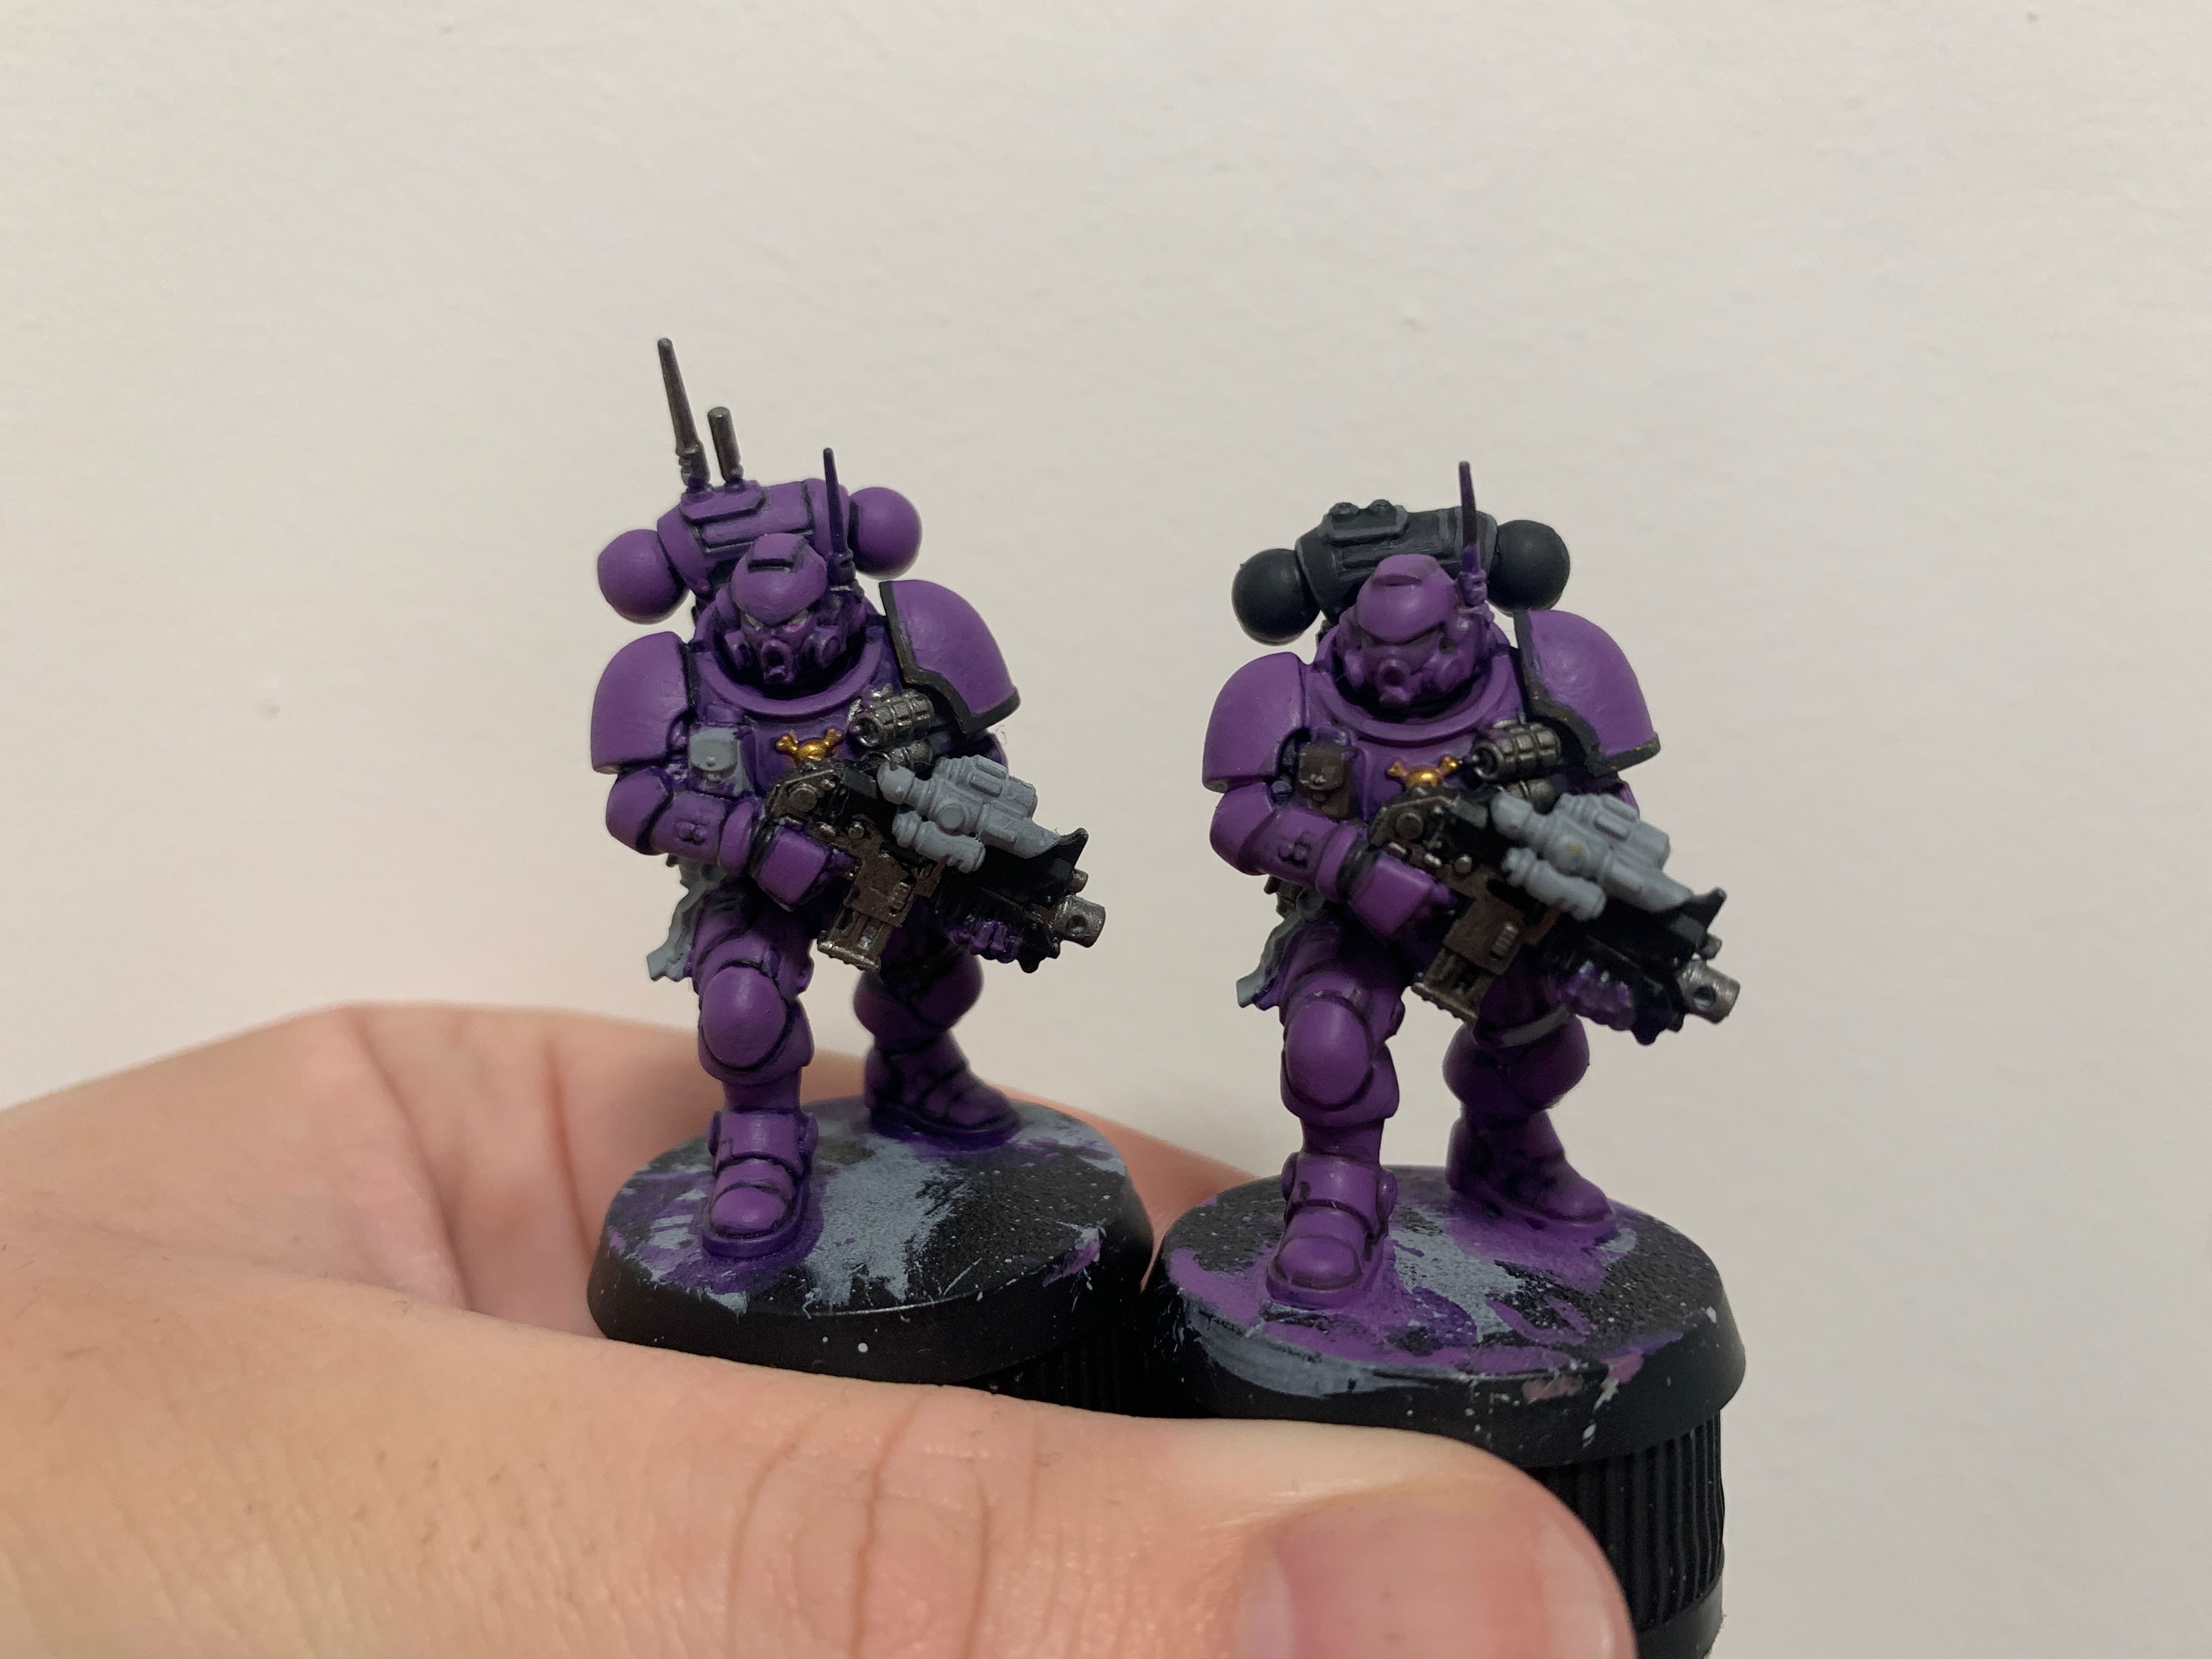 2 purple space marines. The one on the right has a black backpack